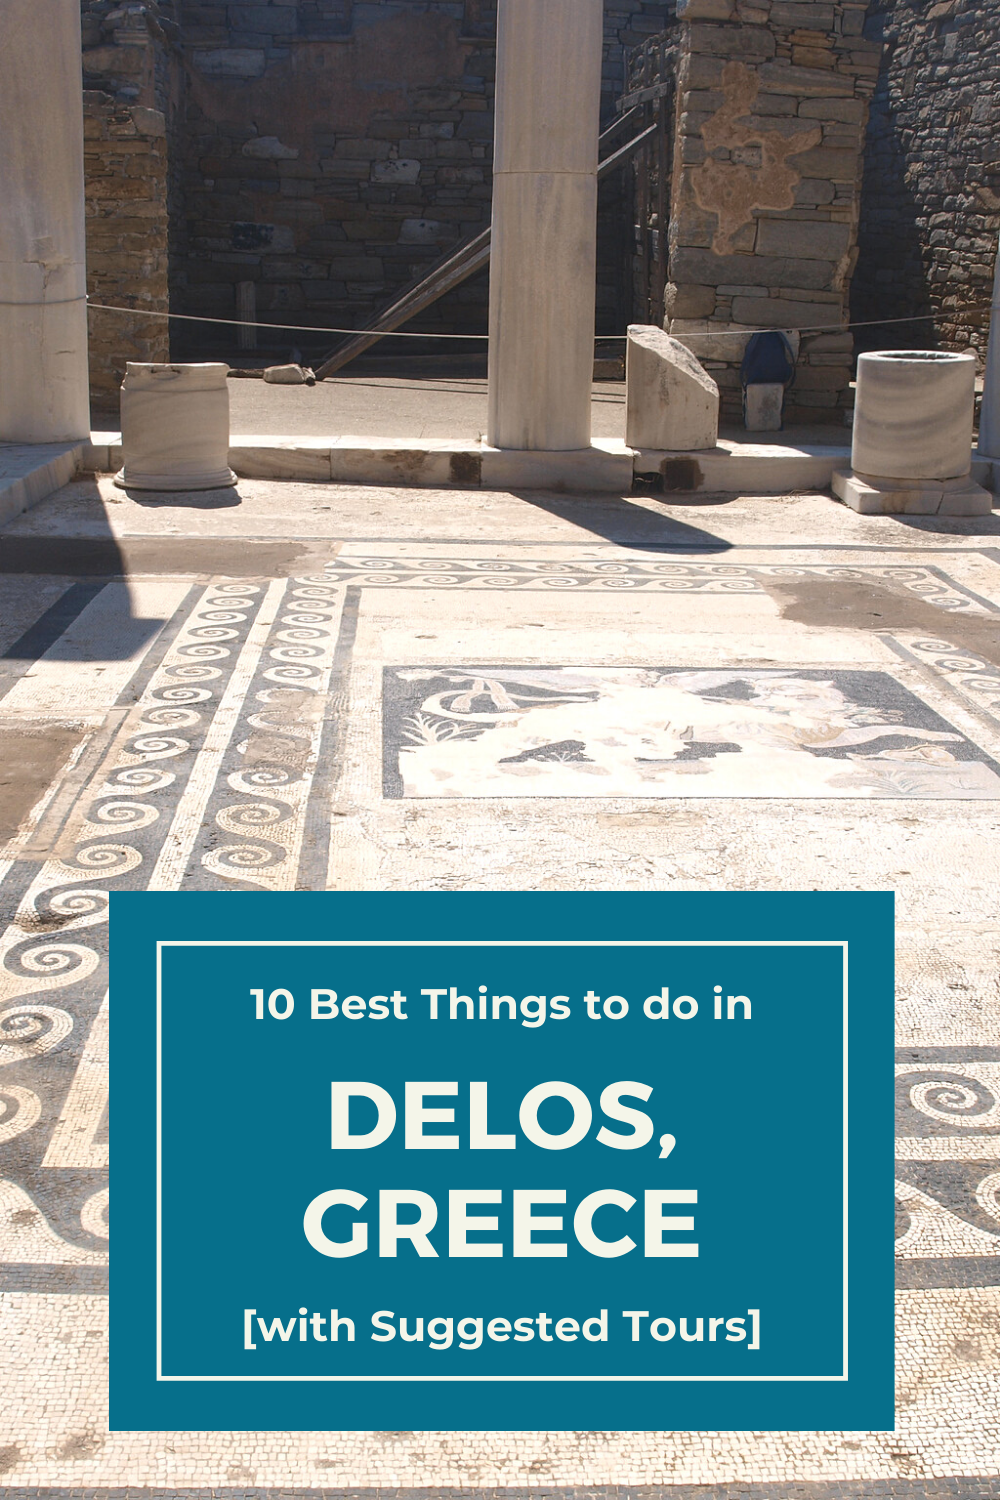 10 Best Things to do in Delos, Greece